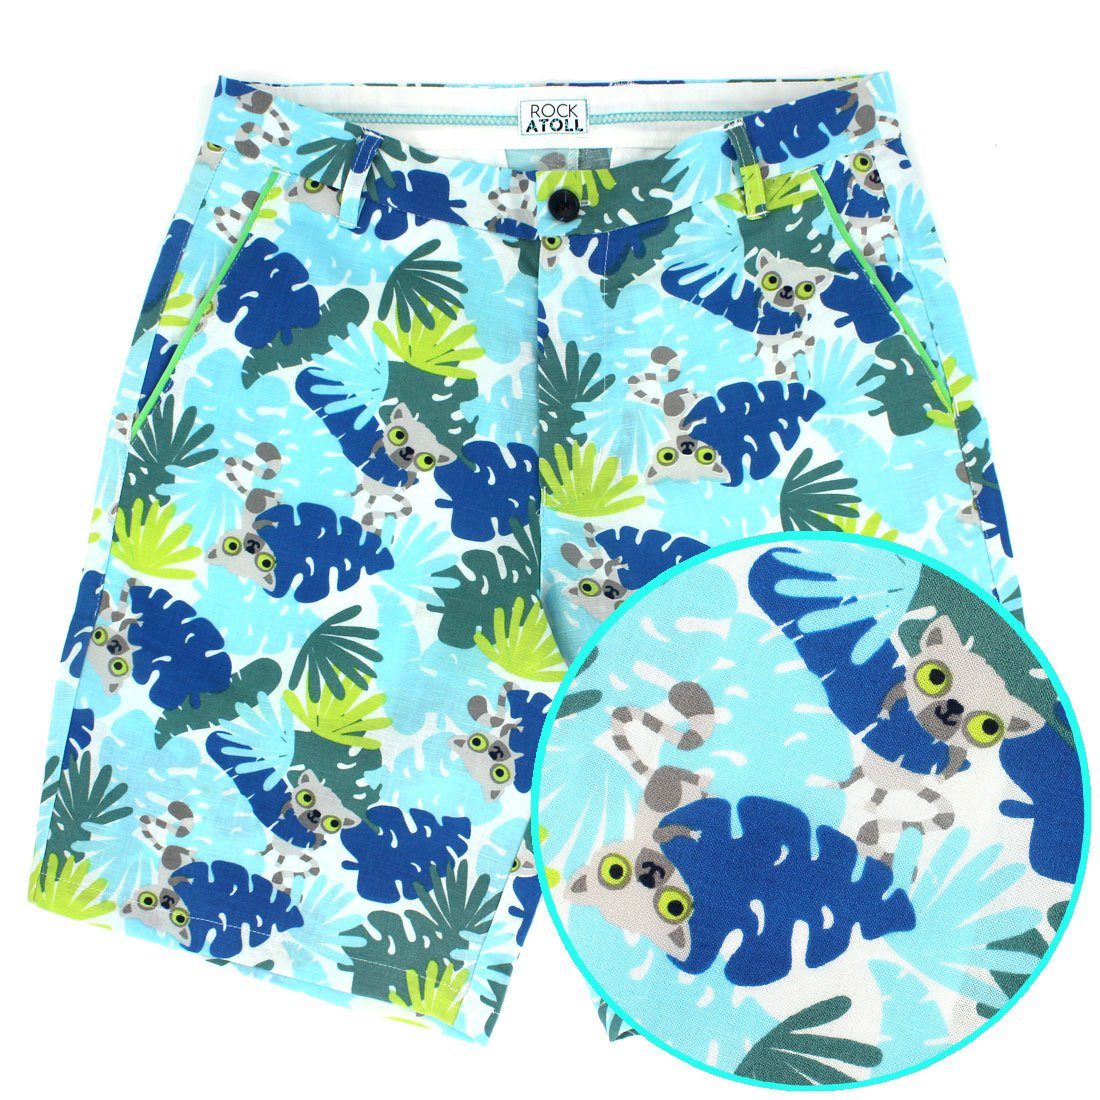 Lemurs and Palm Tree Leaves All Over Print Men's Shorts in Bright Blue